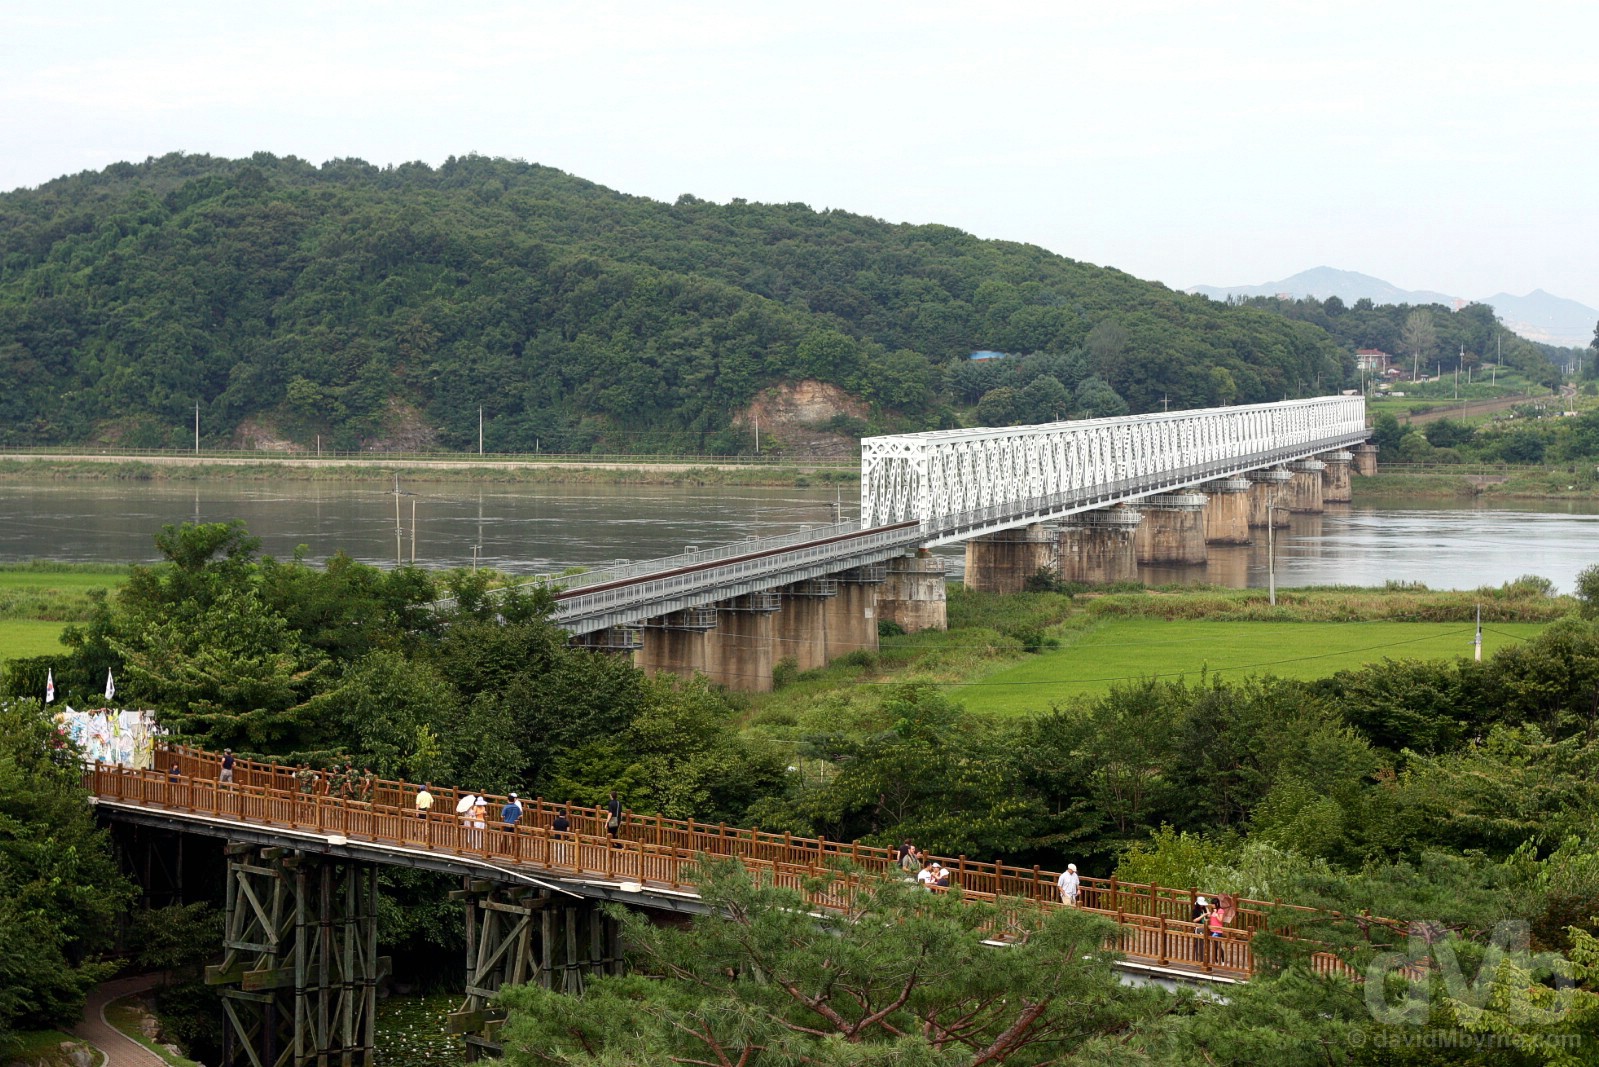 The Bridge of Freedom of the Demilitarized Zone (DMZ) at Imjingak, South Korea. August 21, 2009.